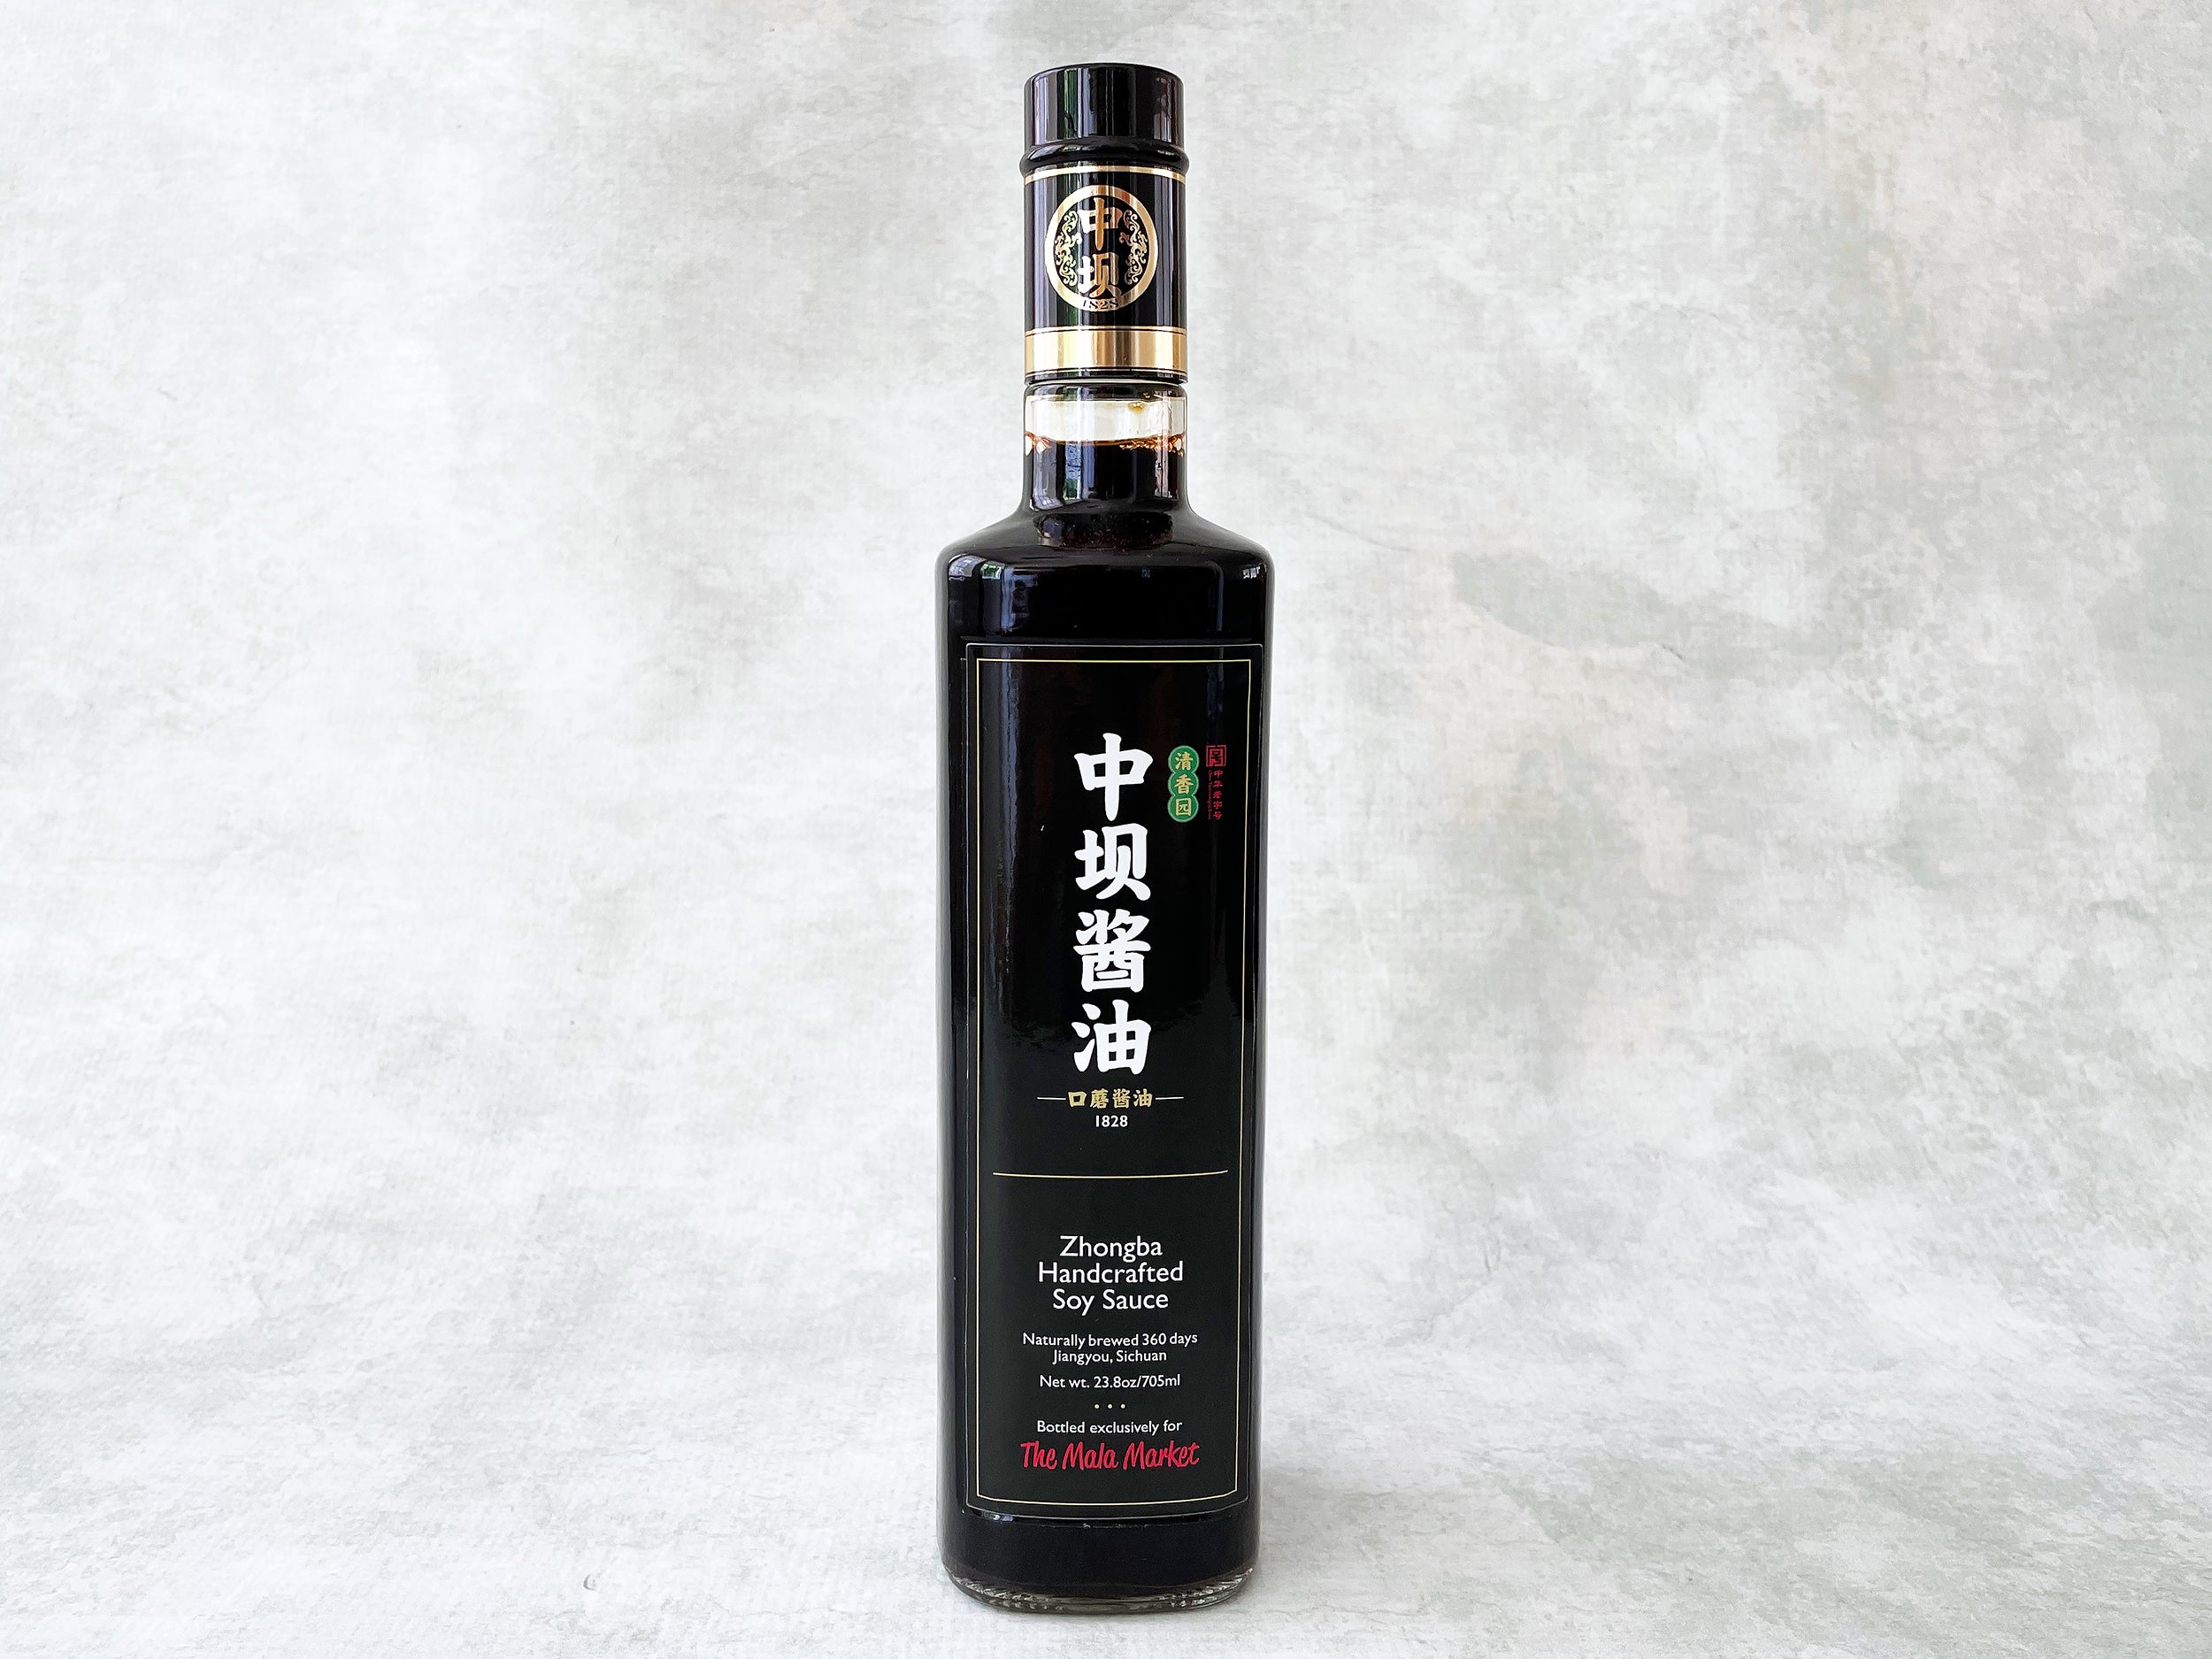 Zhongba Handcrafted Soy Sauce (Naturally Brewed 1 Year)